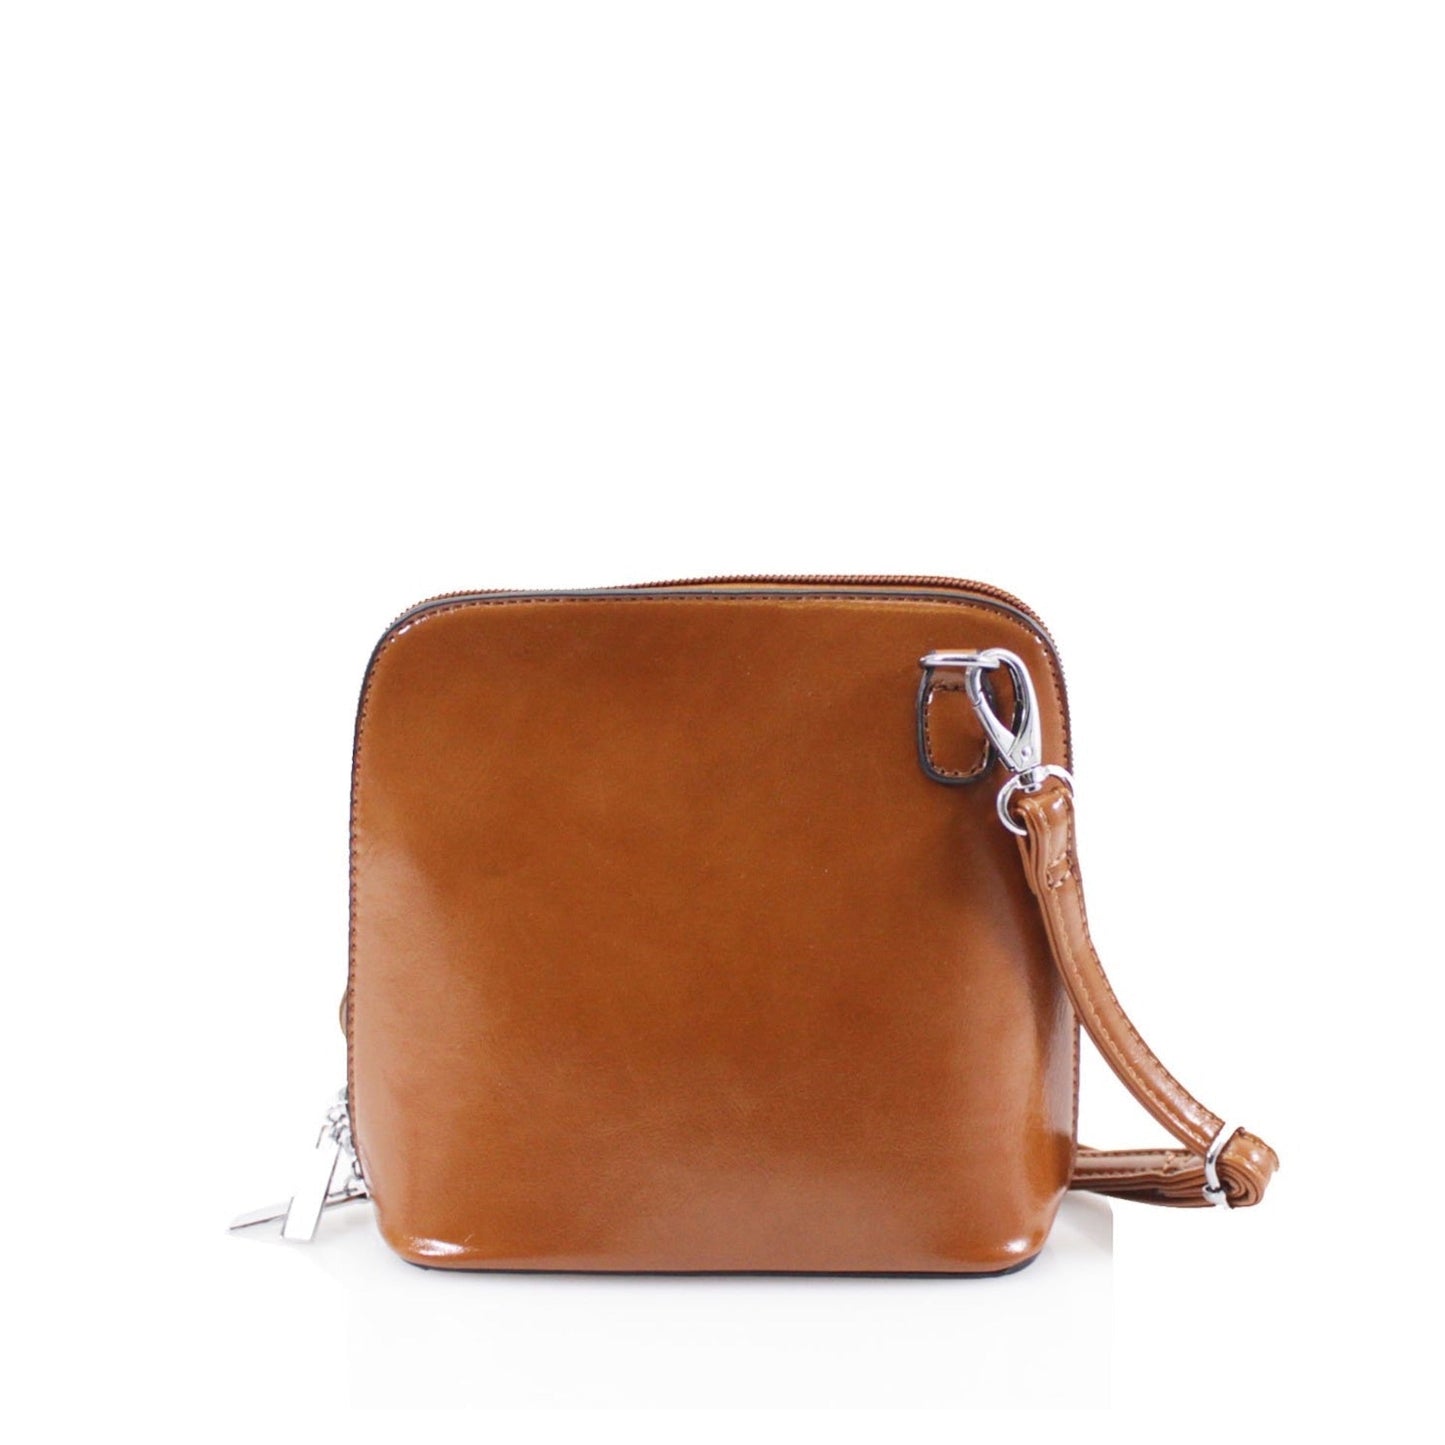 Brown chic bag with long shoulder strap